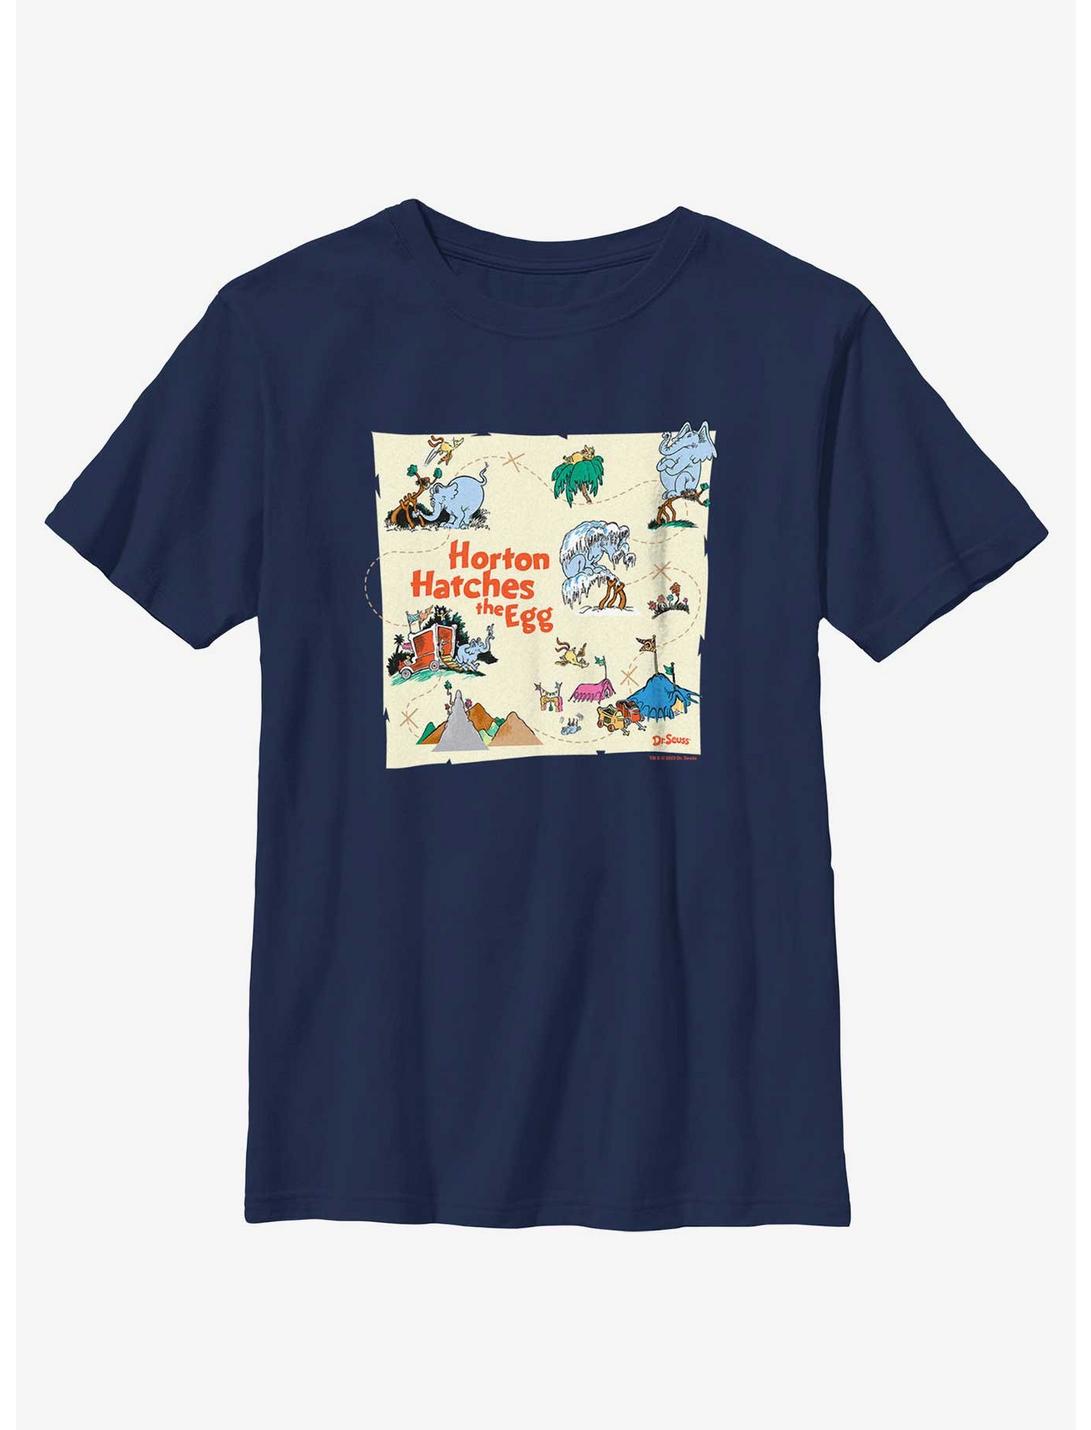 Dr. Seuss's Horton Hatches The Egg Map Youth T-Shirt, NAVY, hi-res